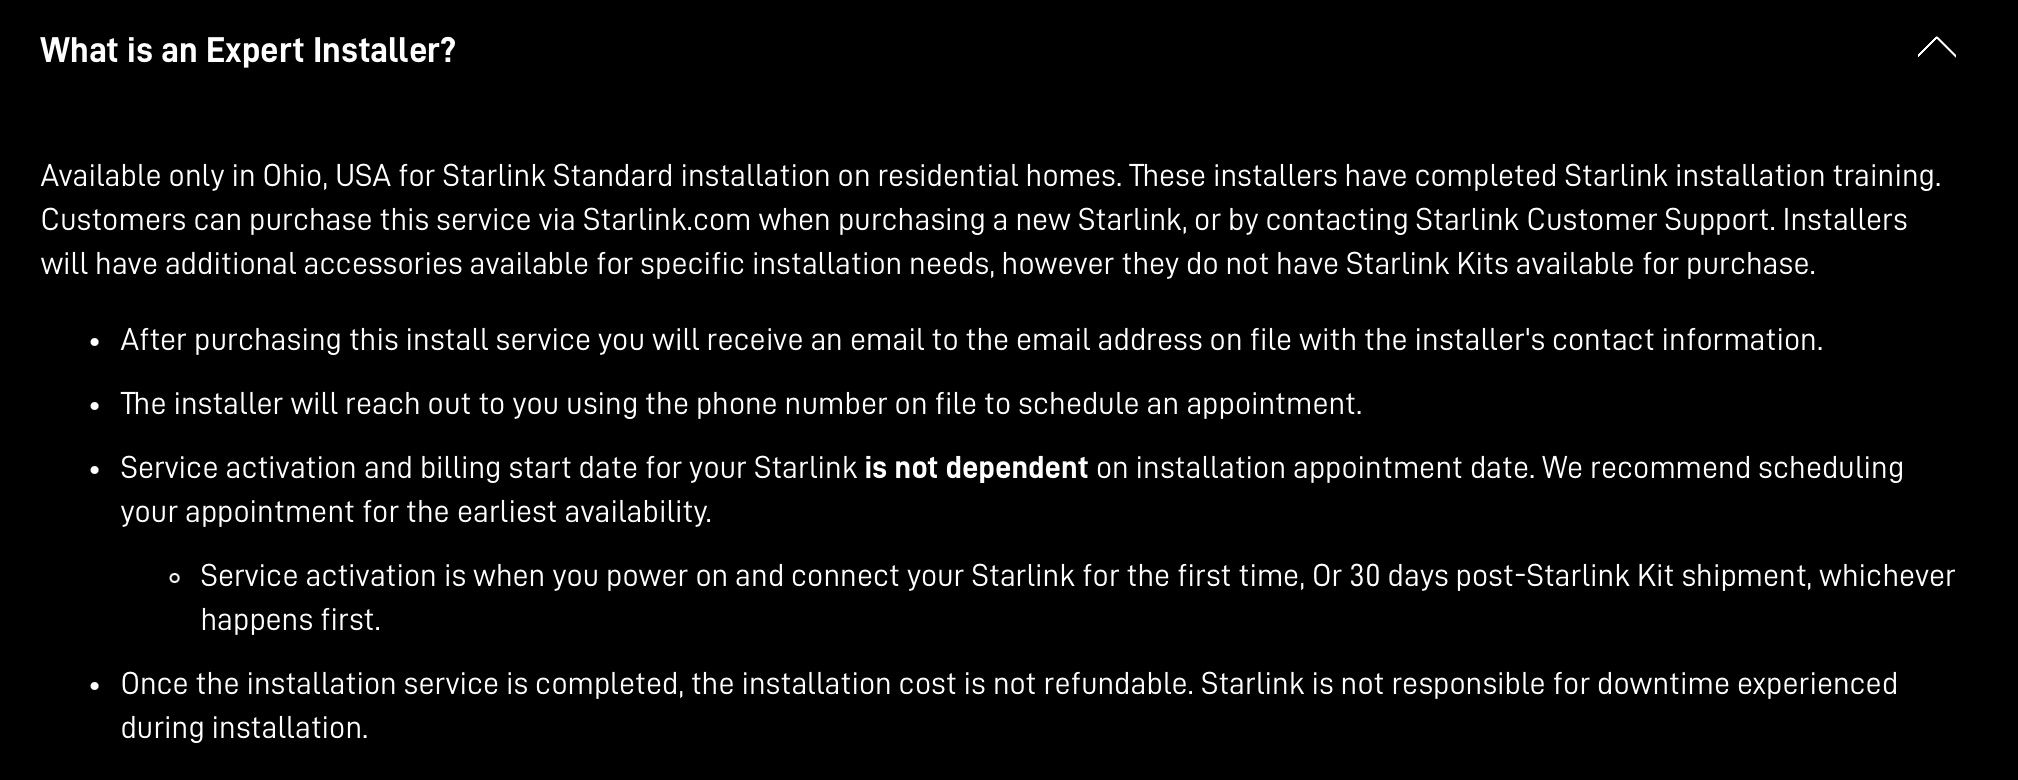 Starlink support article on expert installation